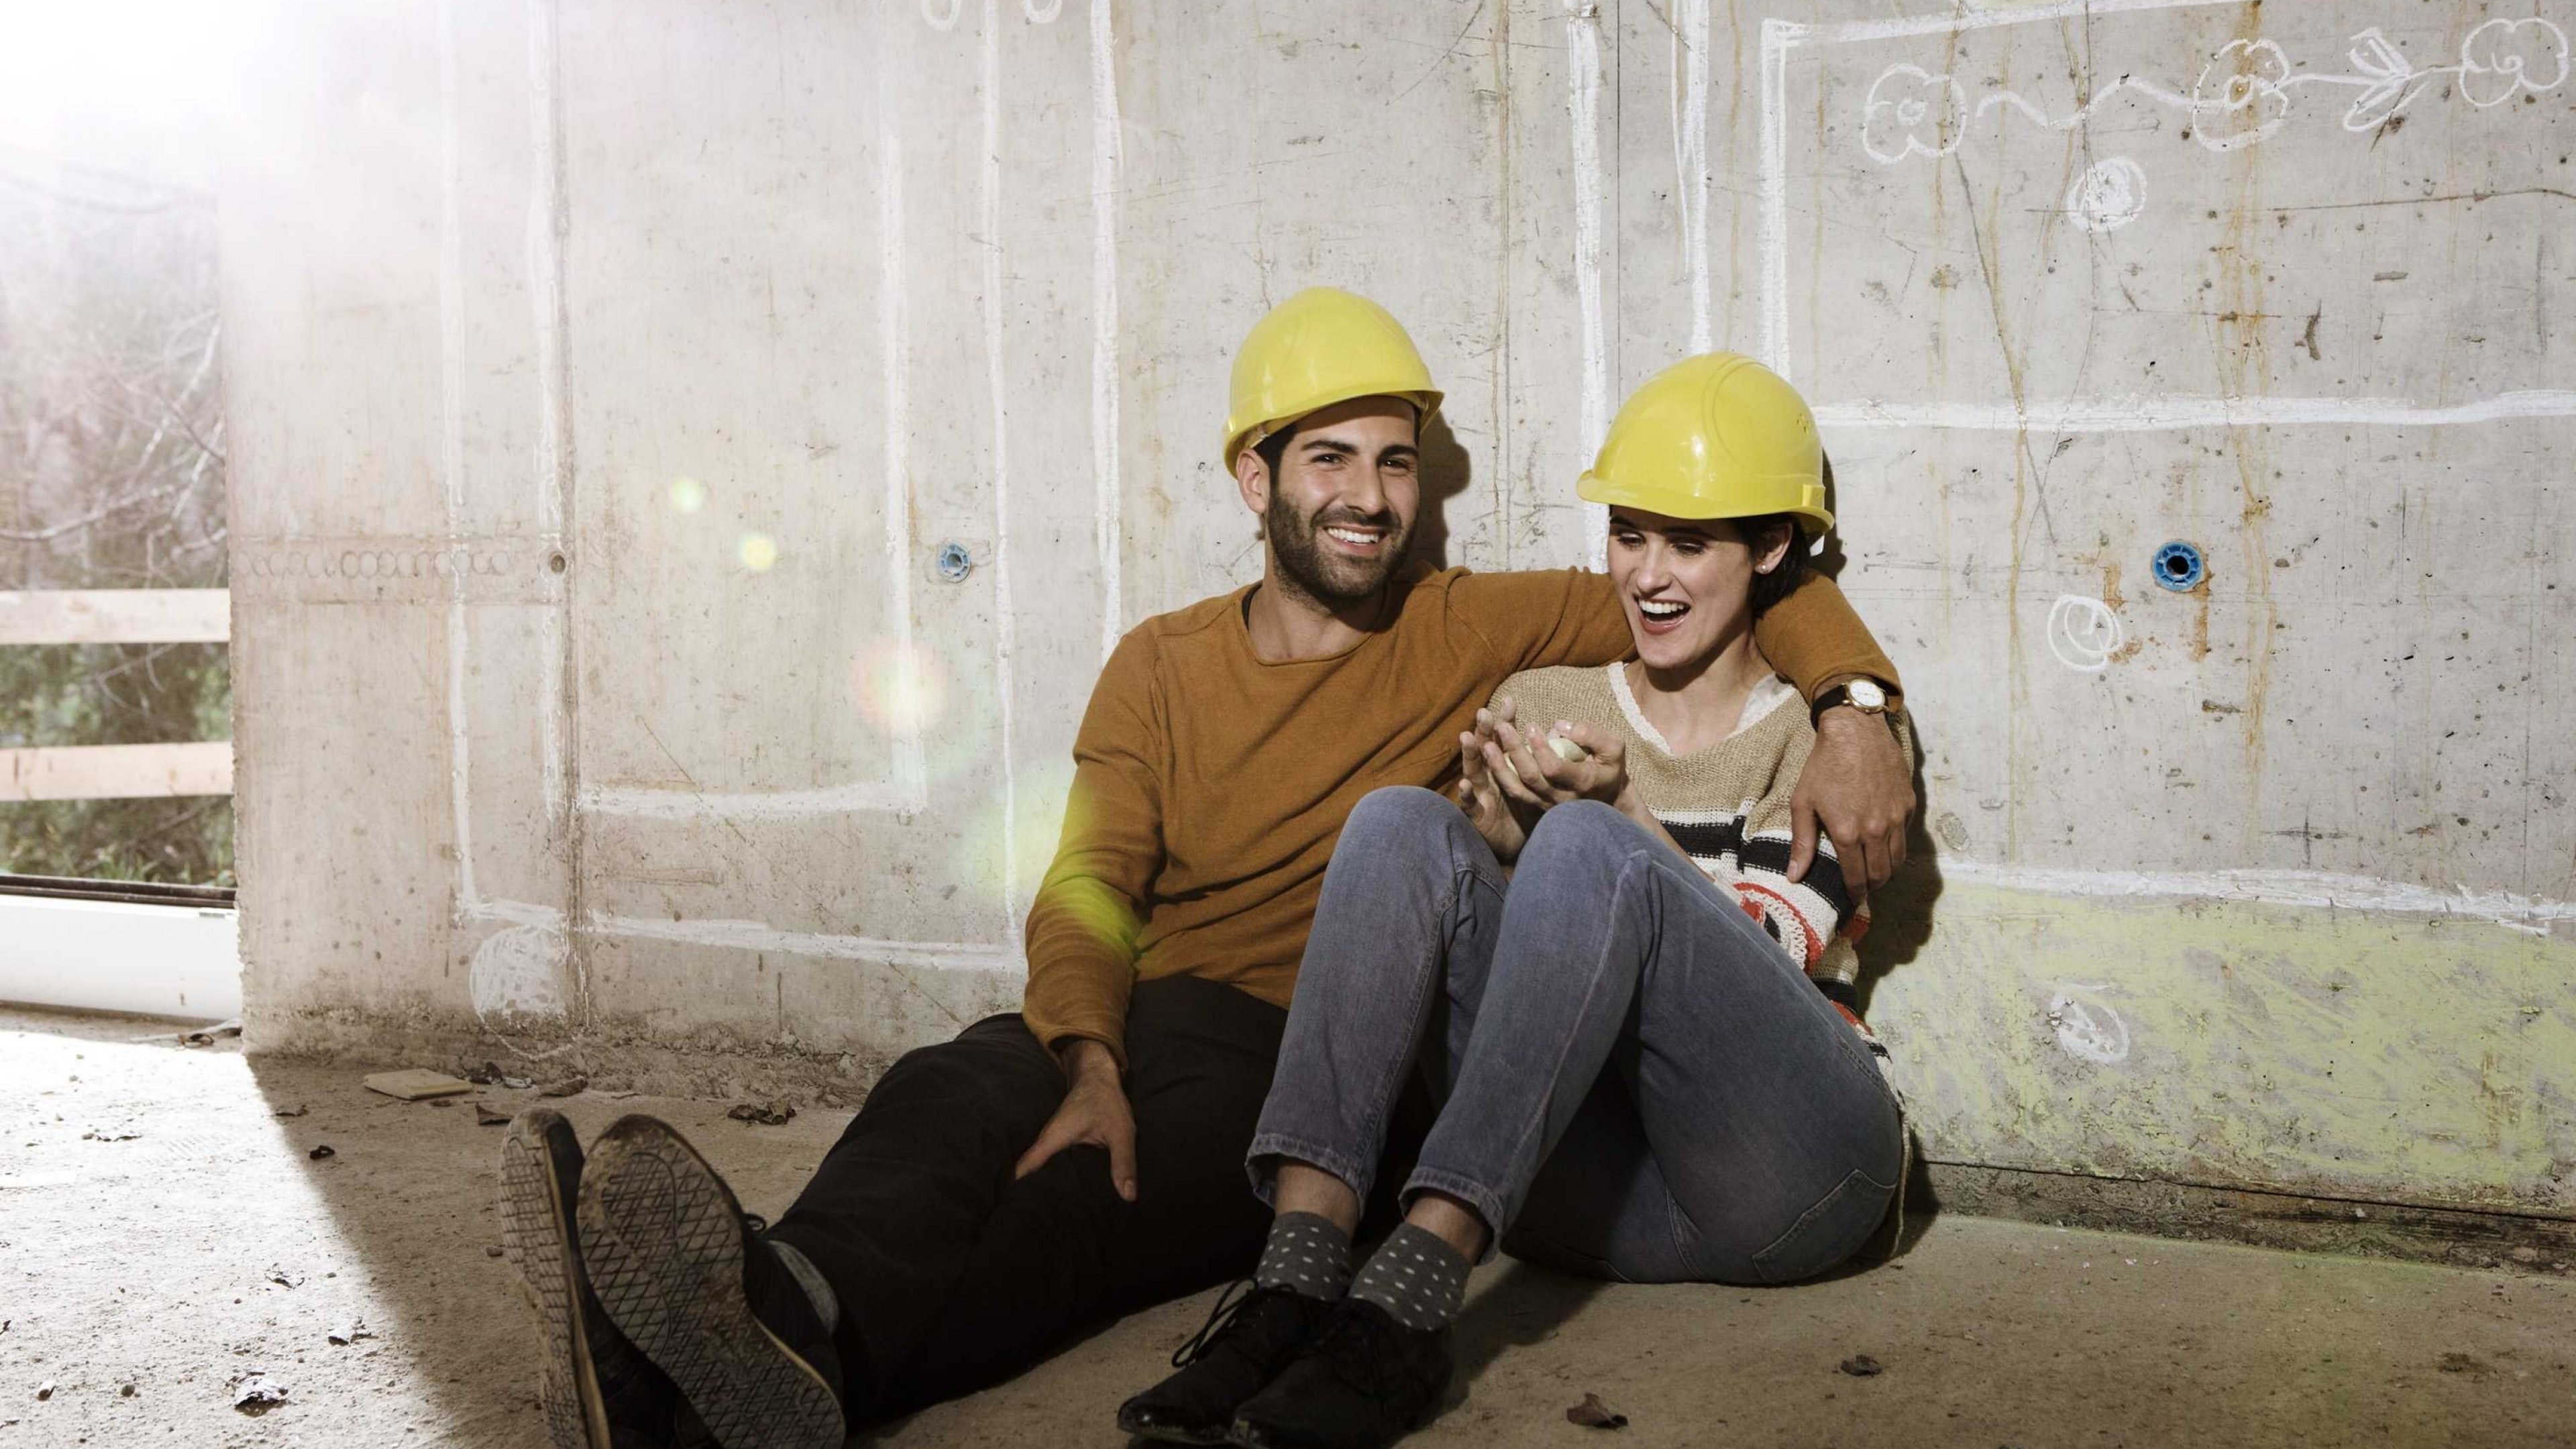 A man and woman wearing safety helmets sitting in front of their future home